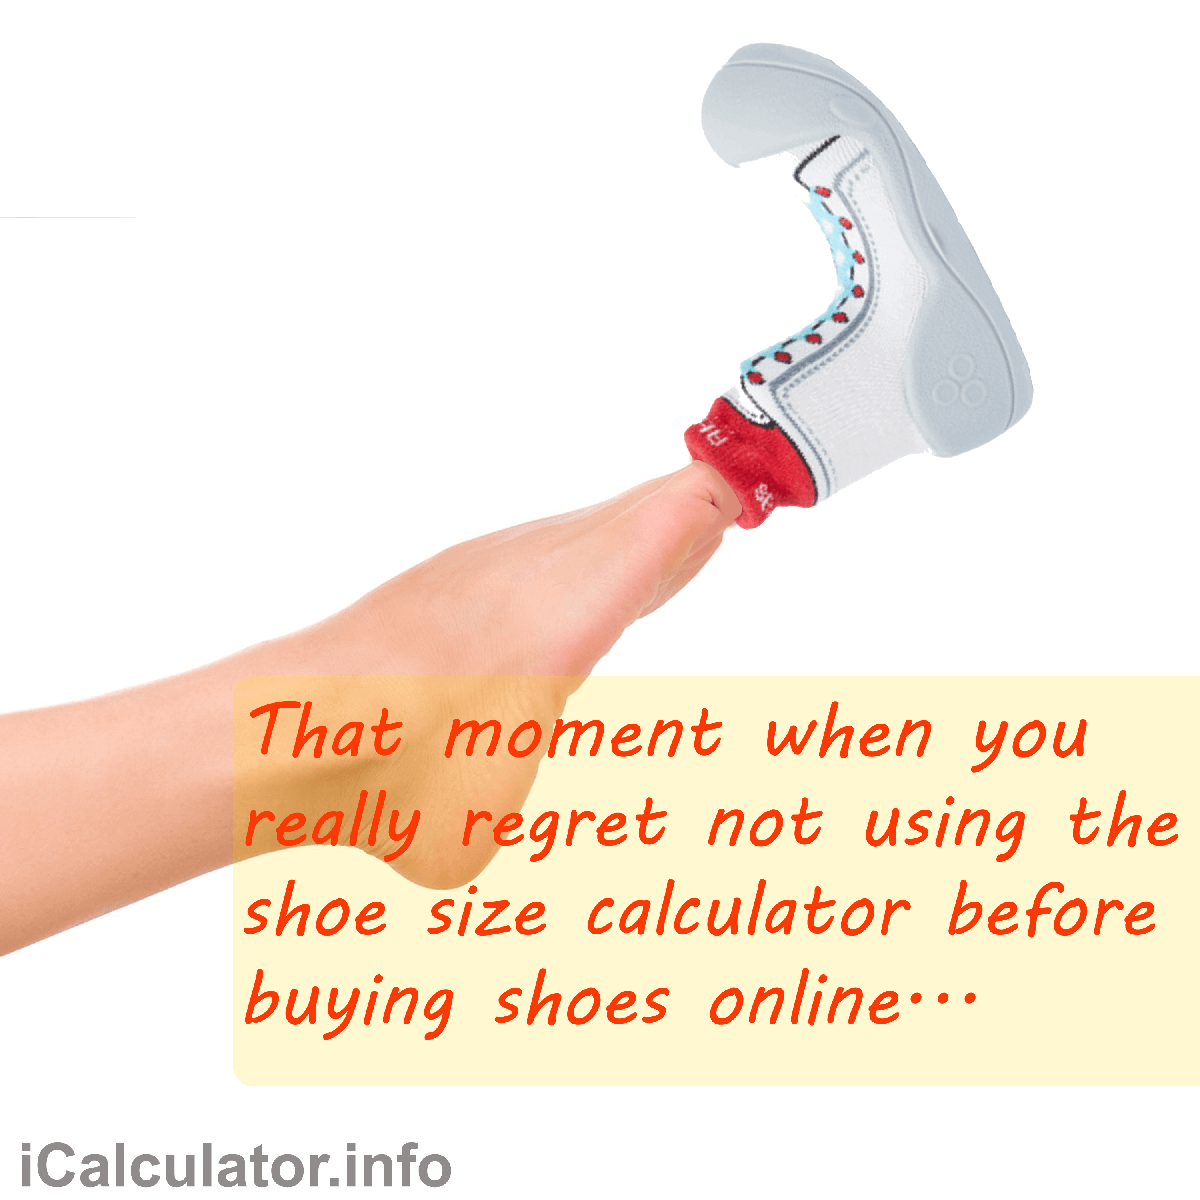 UK to US Shoe Size Calculator. This image shows the calamity of ordering shoes online without first checking the corresponding UK, US and Euro shoe size calculator to ensure that your new shoes and trainers fit correctly.